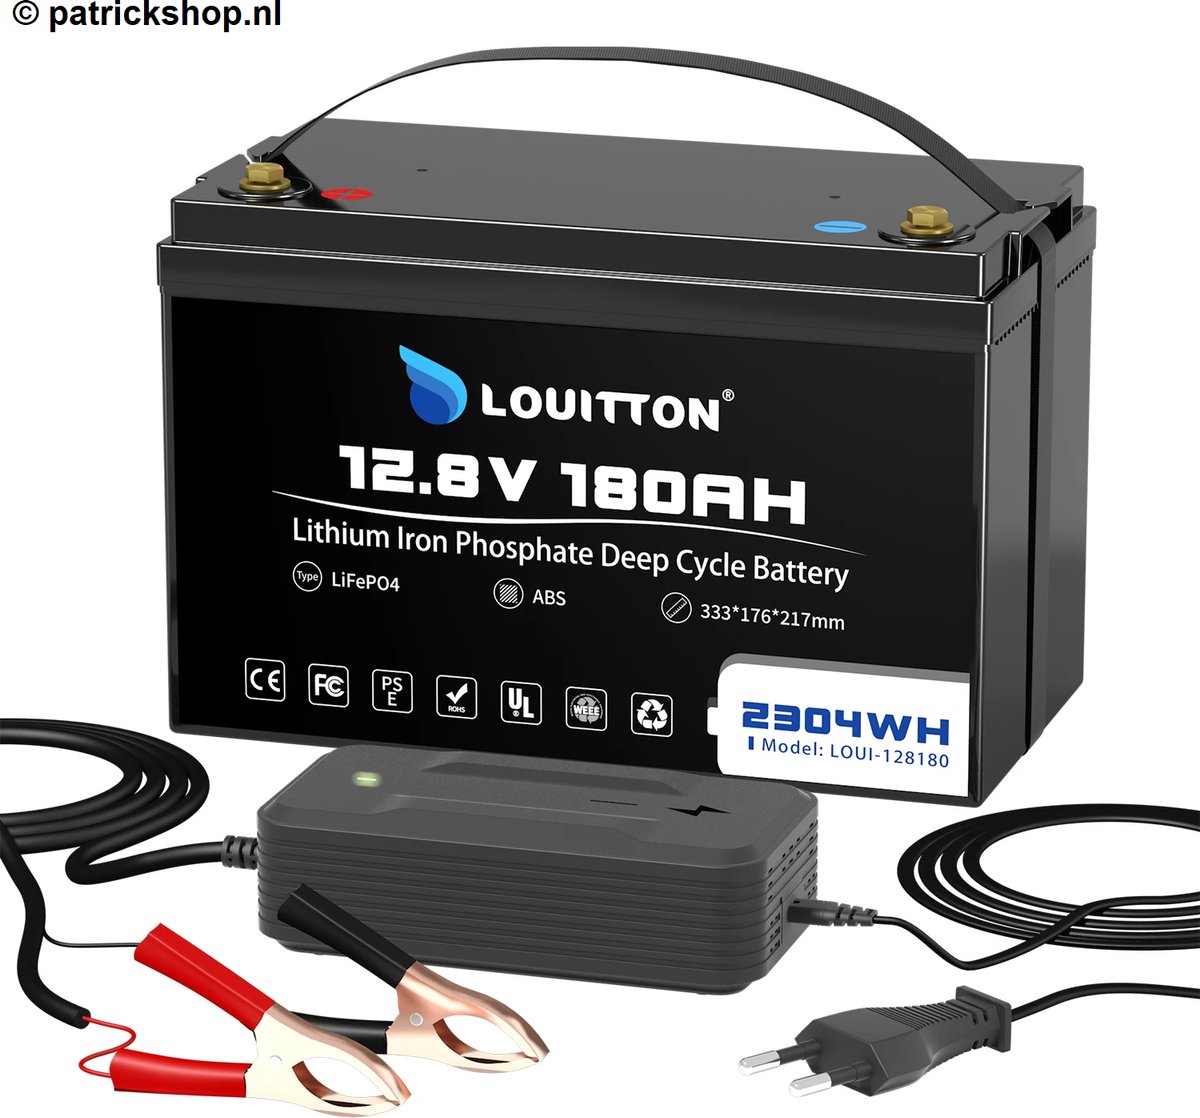 12V 180AH 2304WH LifePo4 Accu met BMS inclusief lader